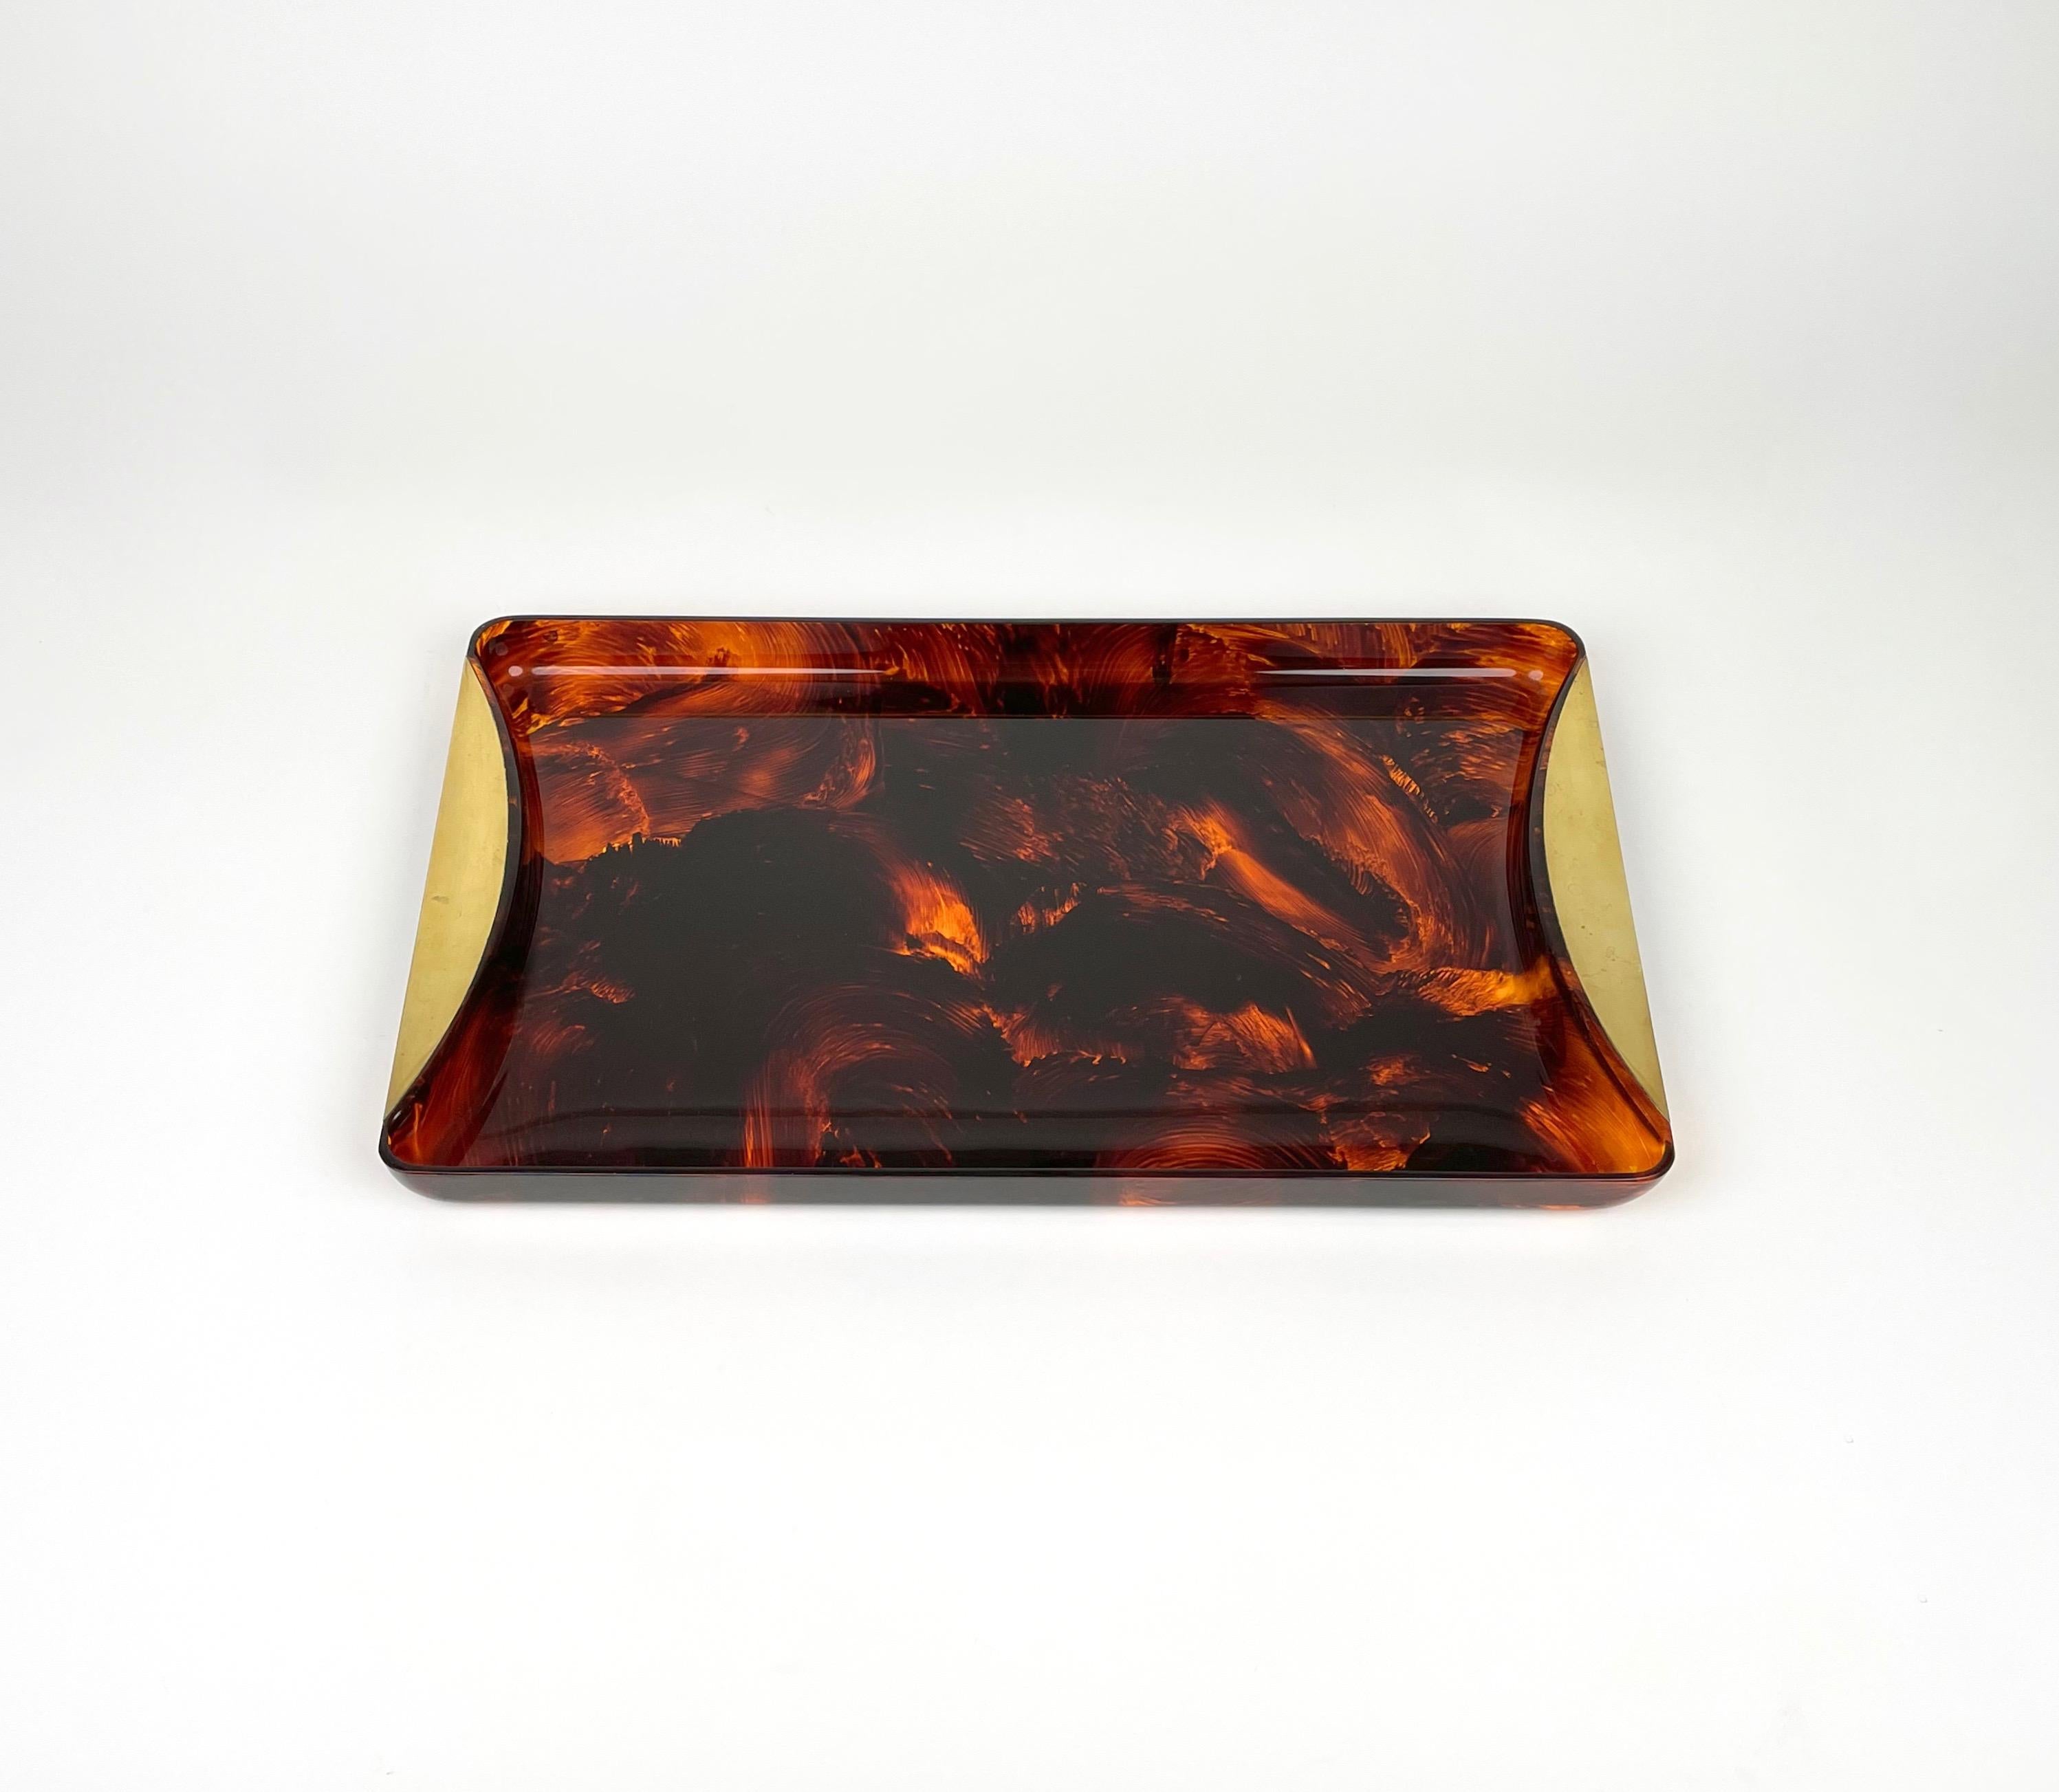 Rectangular serving tray in tortoiseshell-effect lucite with brass handles designed by Guzzini. Made in Italy in the 1970s. 

The original label 